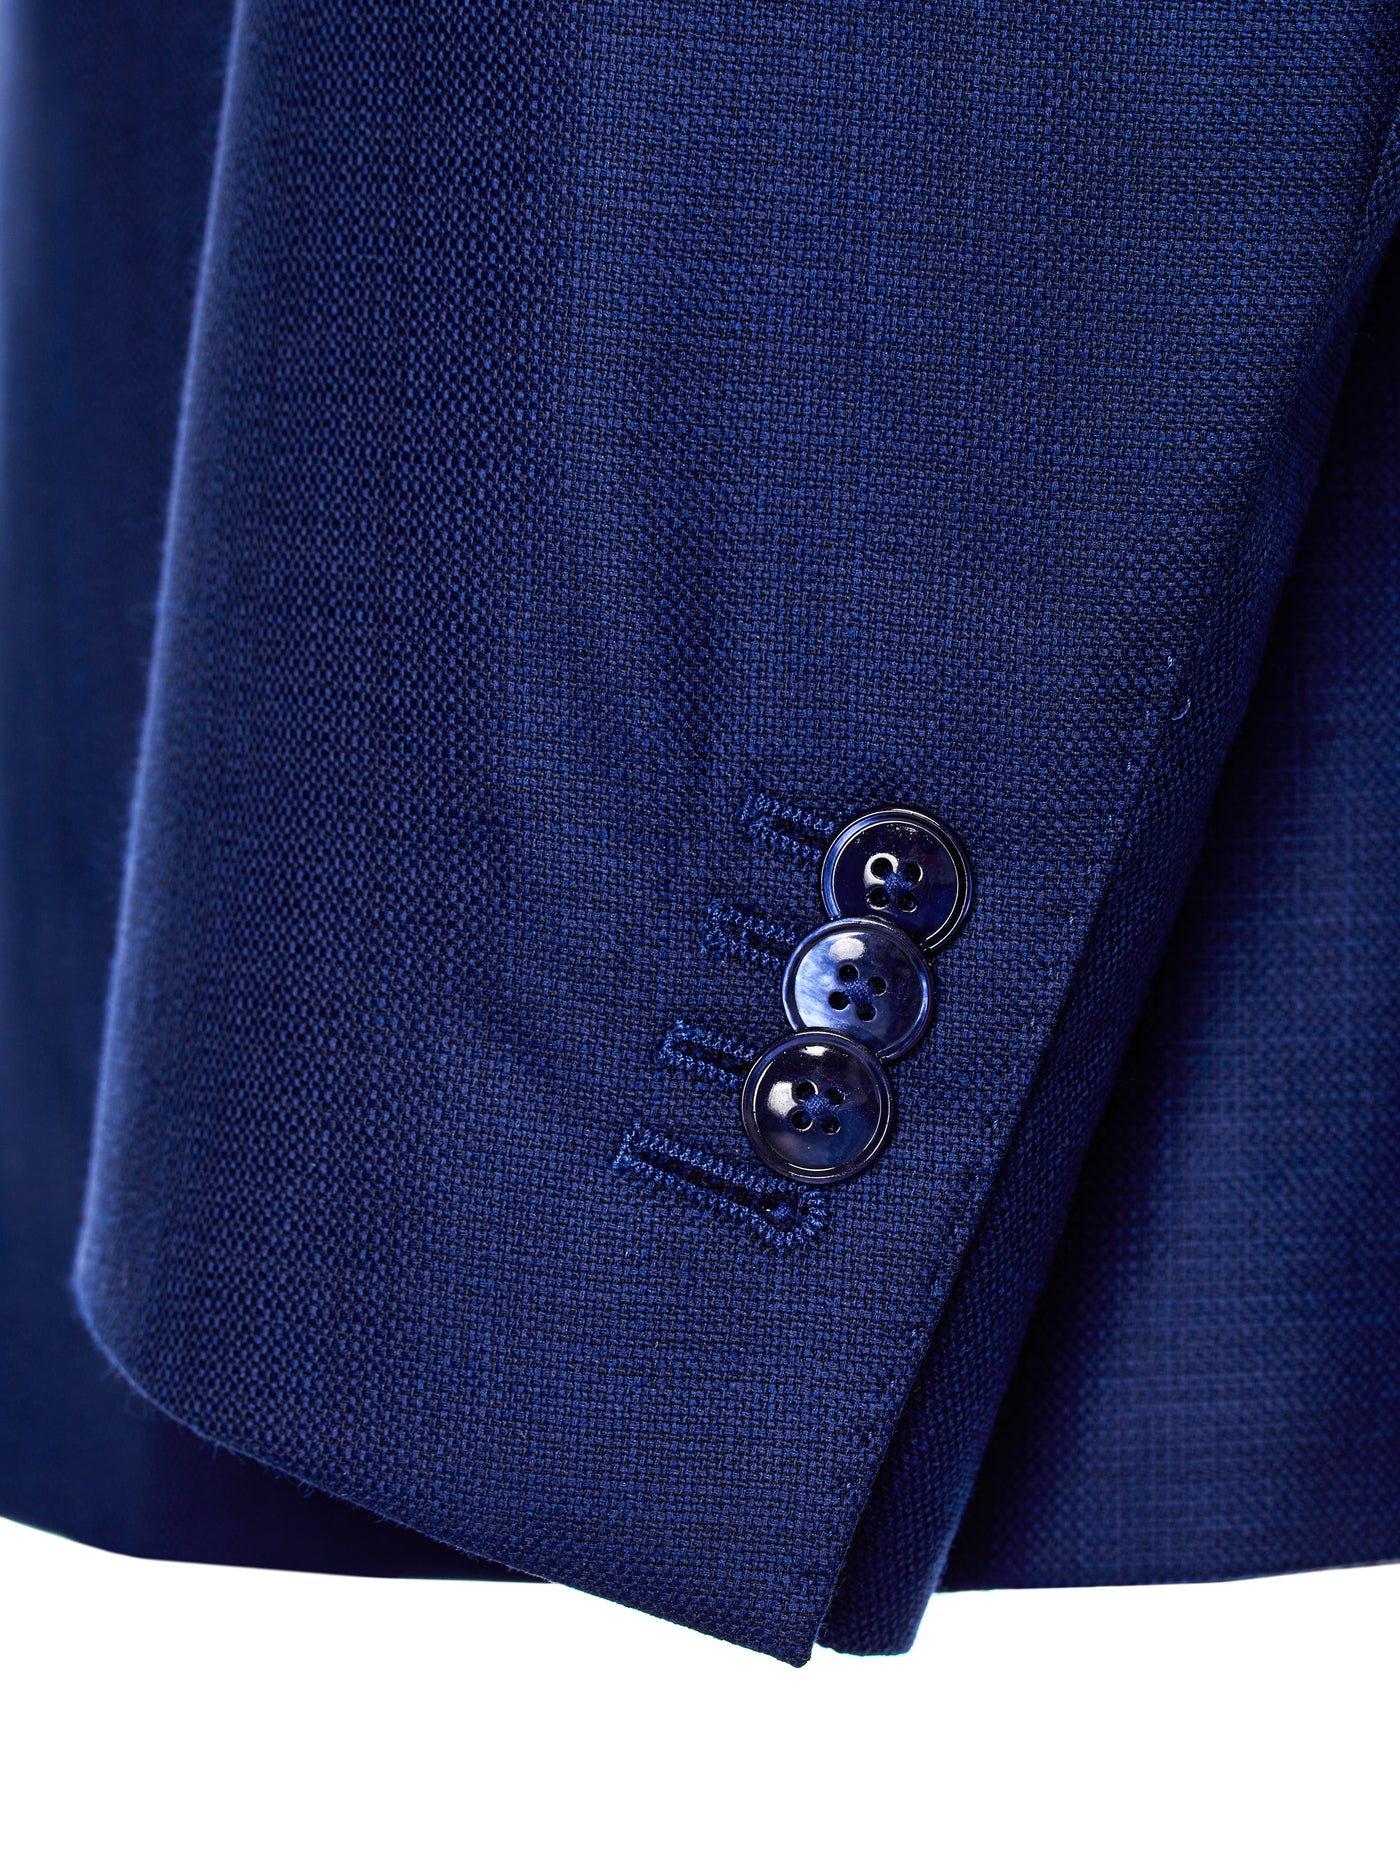 Navy blue two-piece suit with fine texture, tailored fit